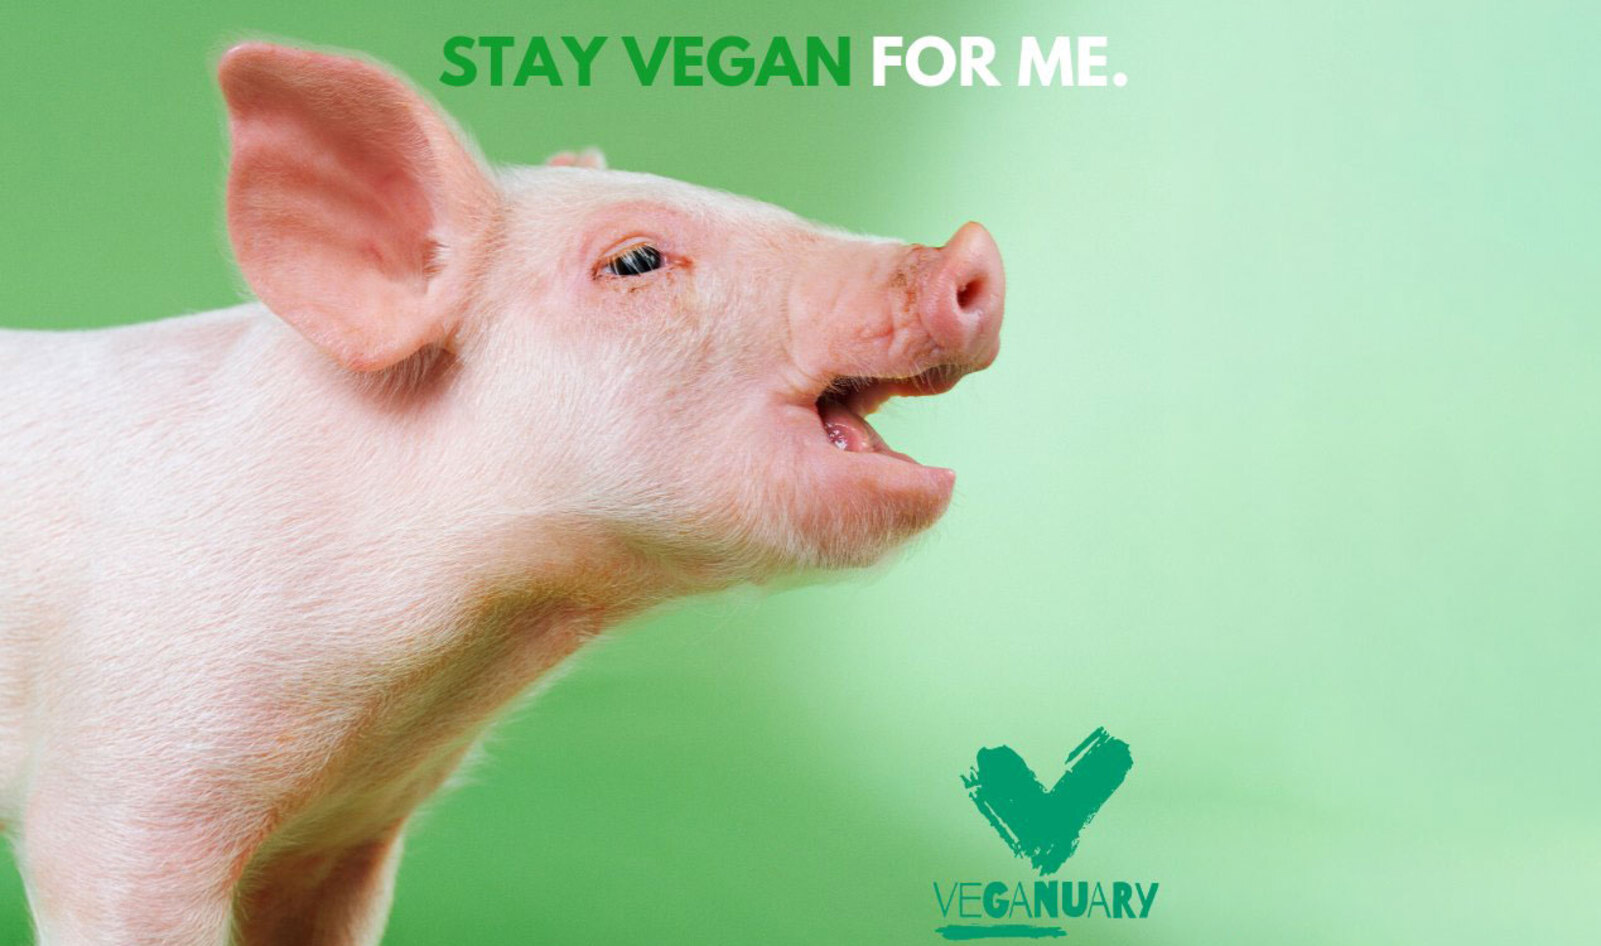 Veganuary Comes to United States in 2020